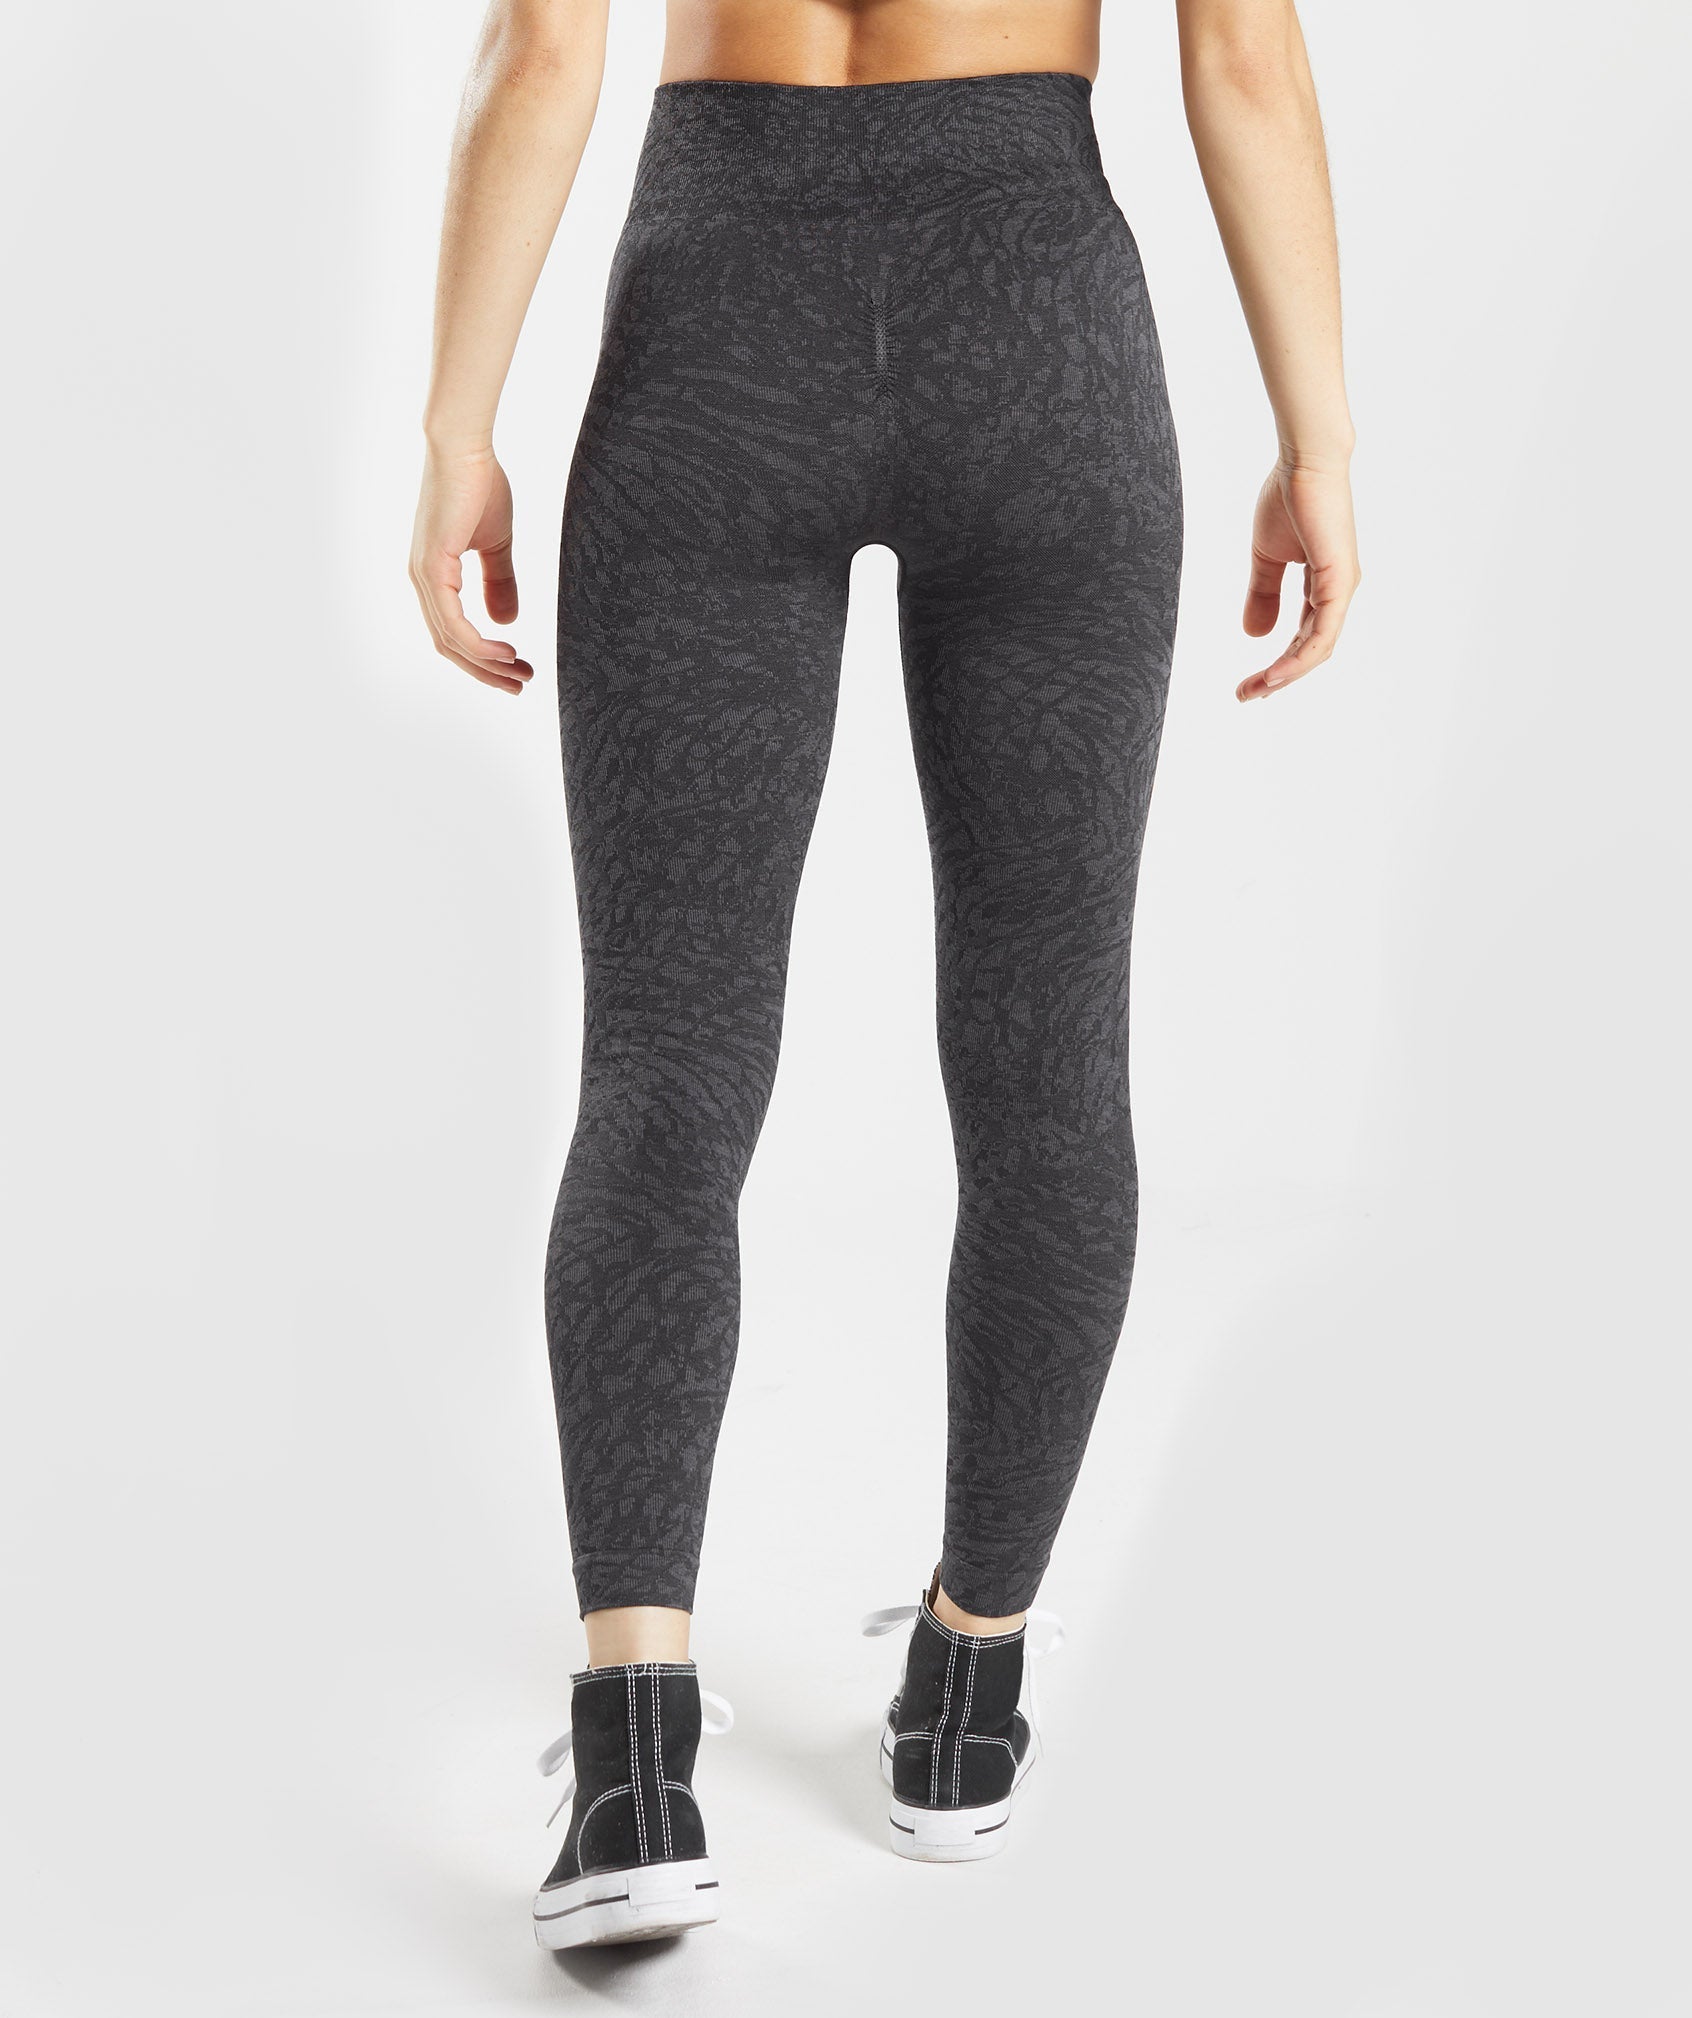 GYMSHARK CAPTIVATE BLACK Soft Silky Leggings Small Fashion High Waisted  £10.10 - PicClick UK